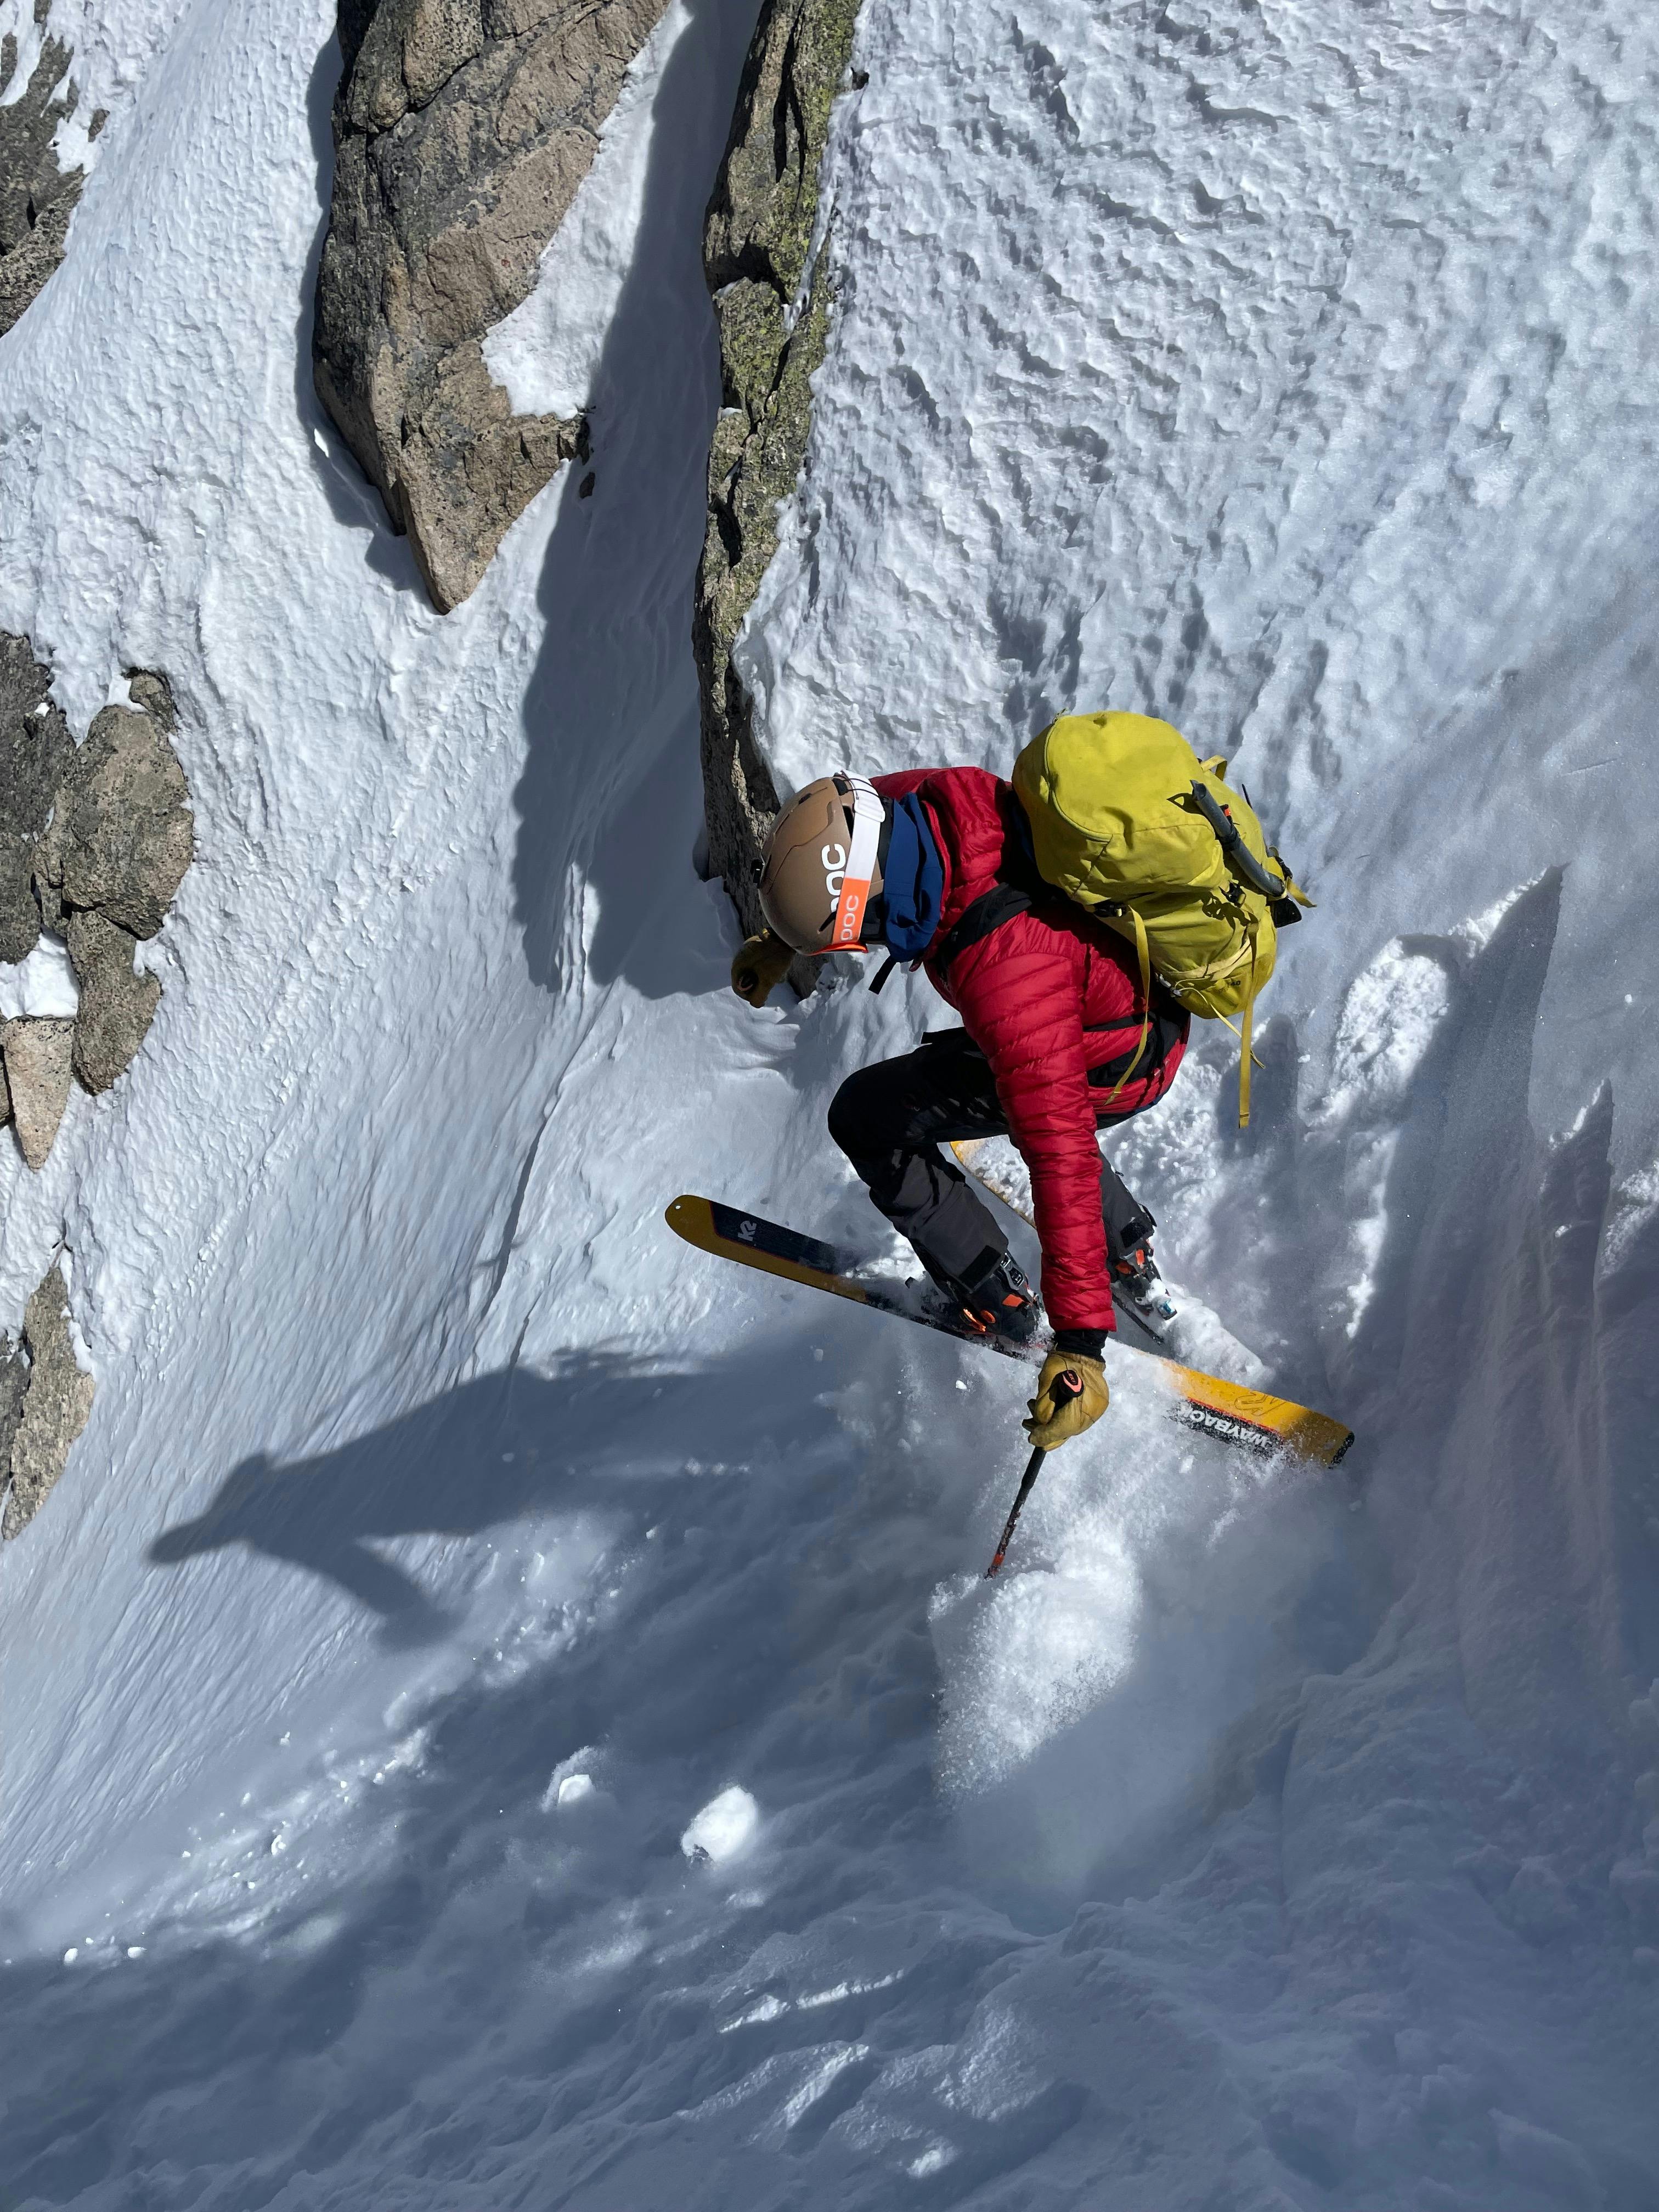 A skier heads down a narrow chute turning on top of a chunk of snow.